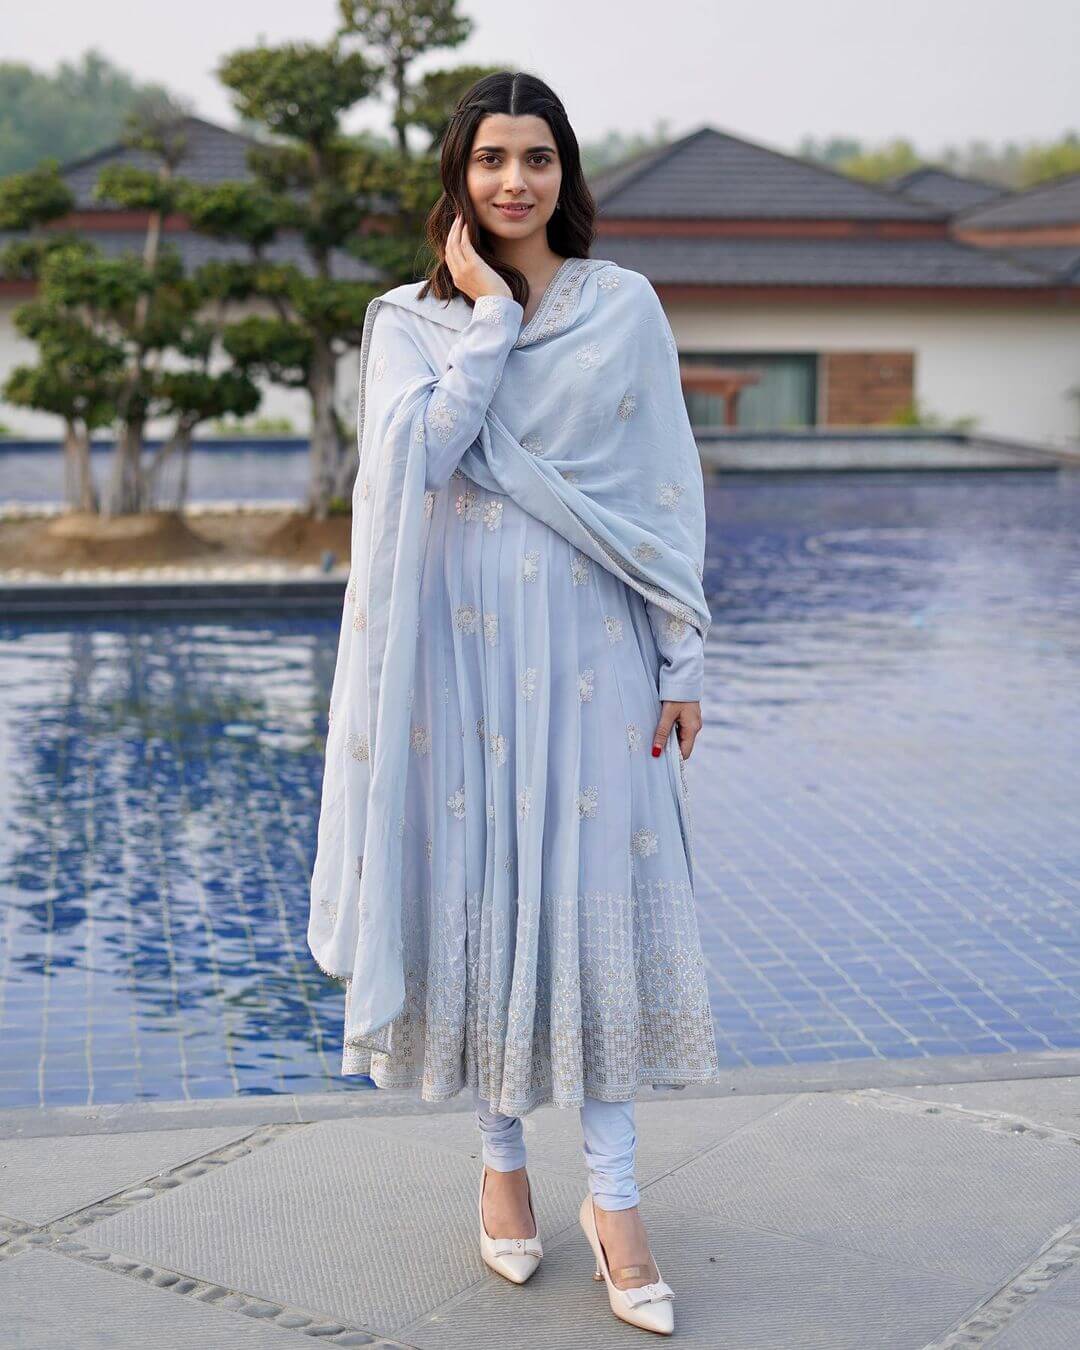 Nimrat Khaira Simple And Classy Look In Ivory Blue Anarkali Outfit